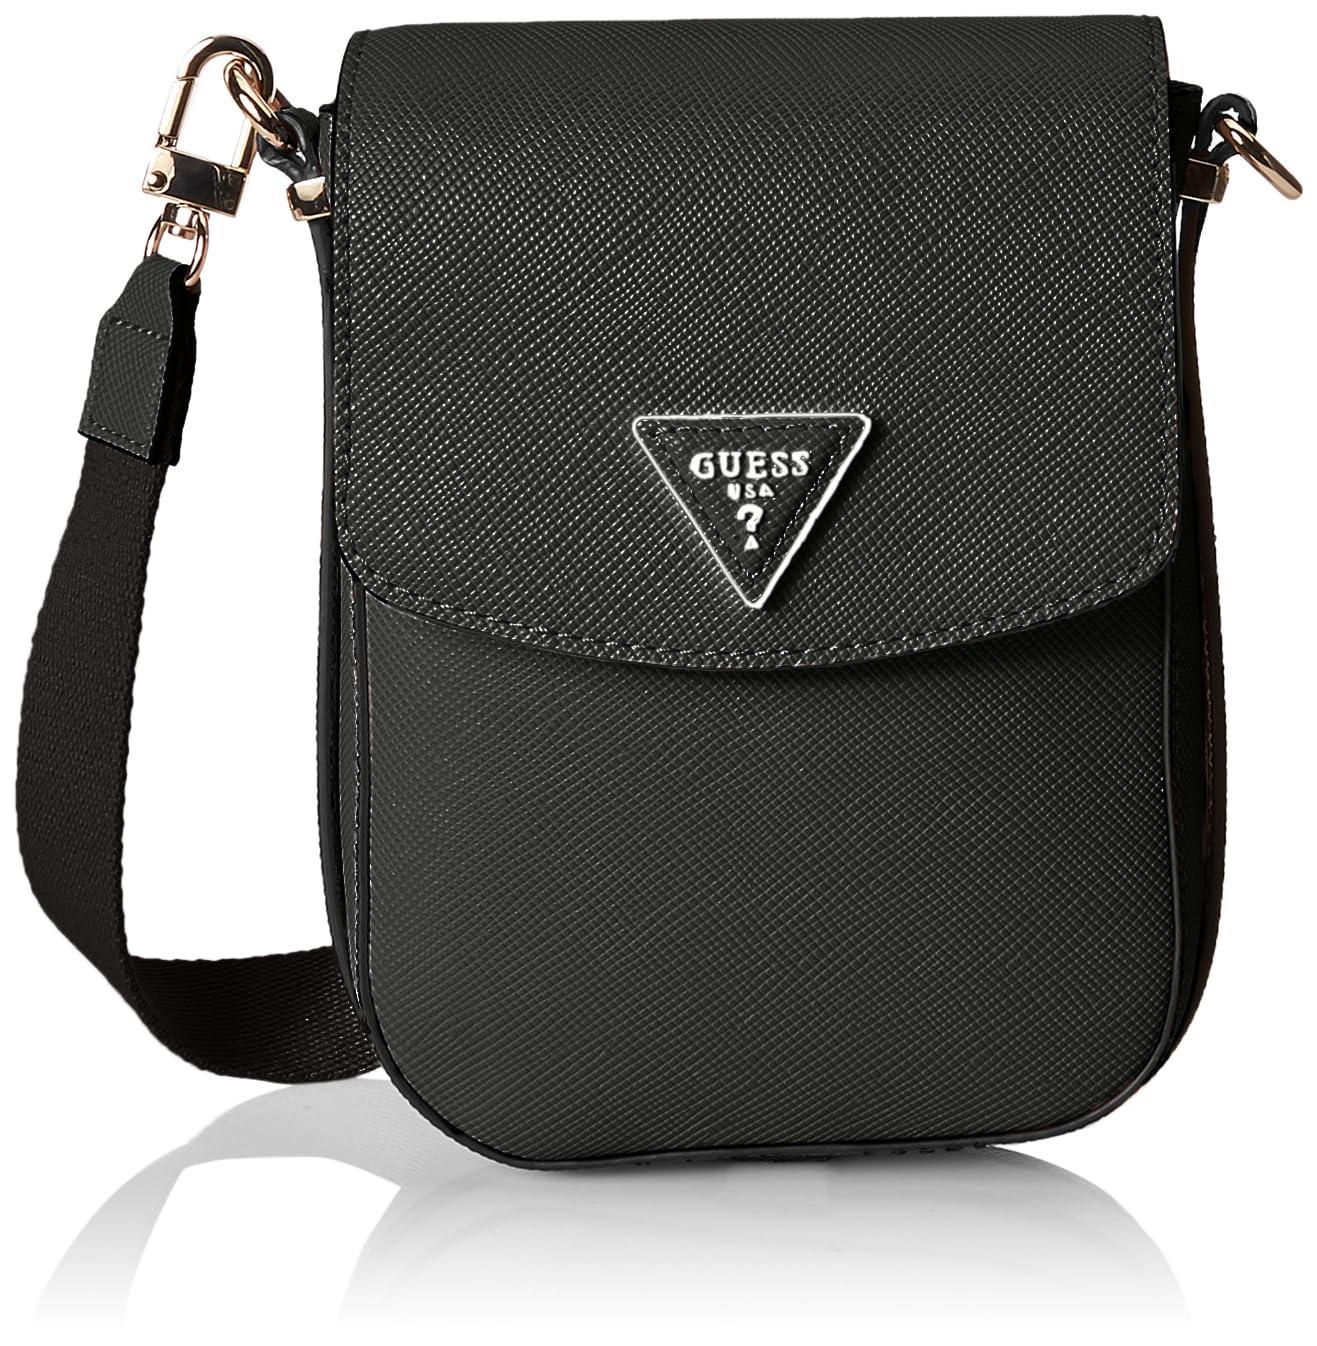 Guess Brynlee Mini Convertible Backpack in Black